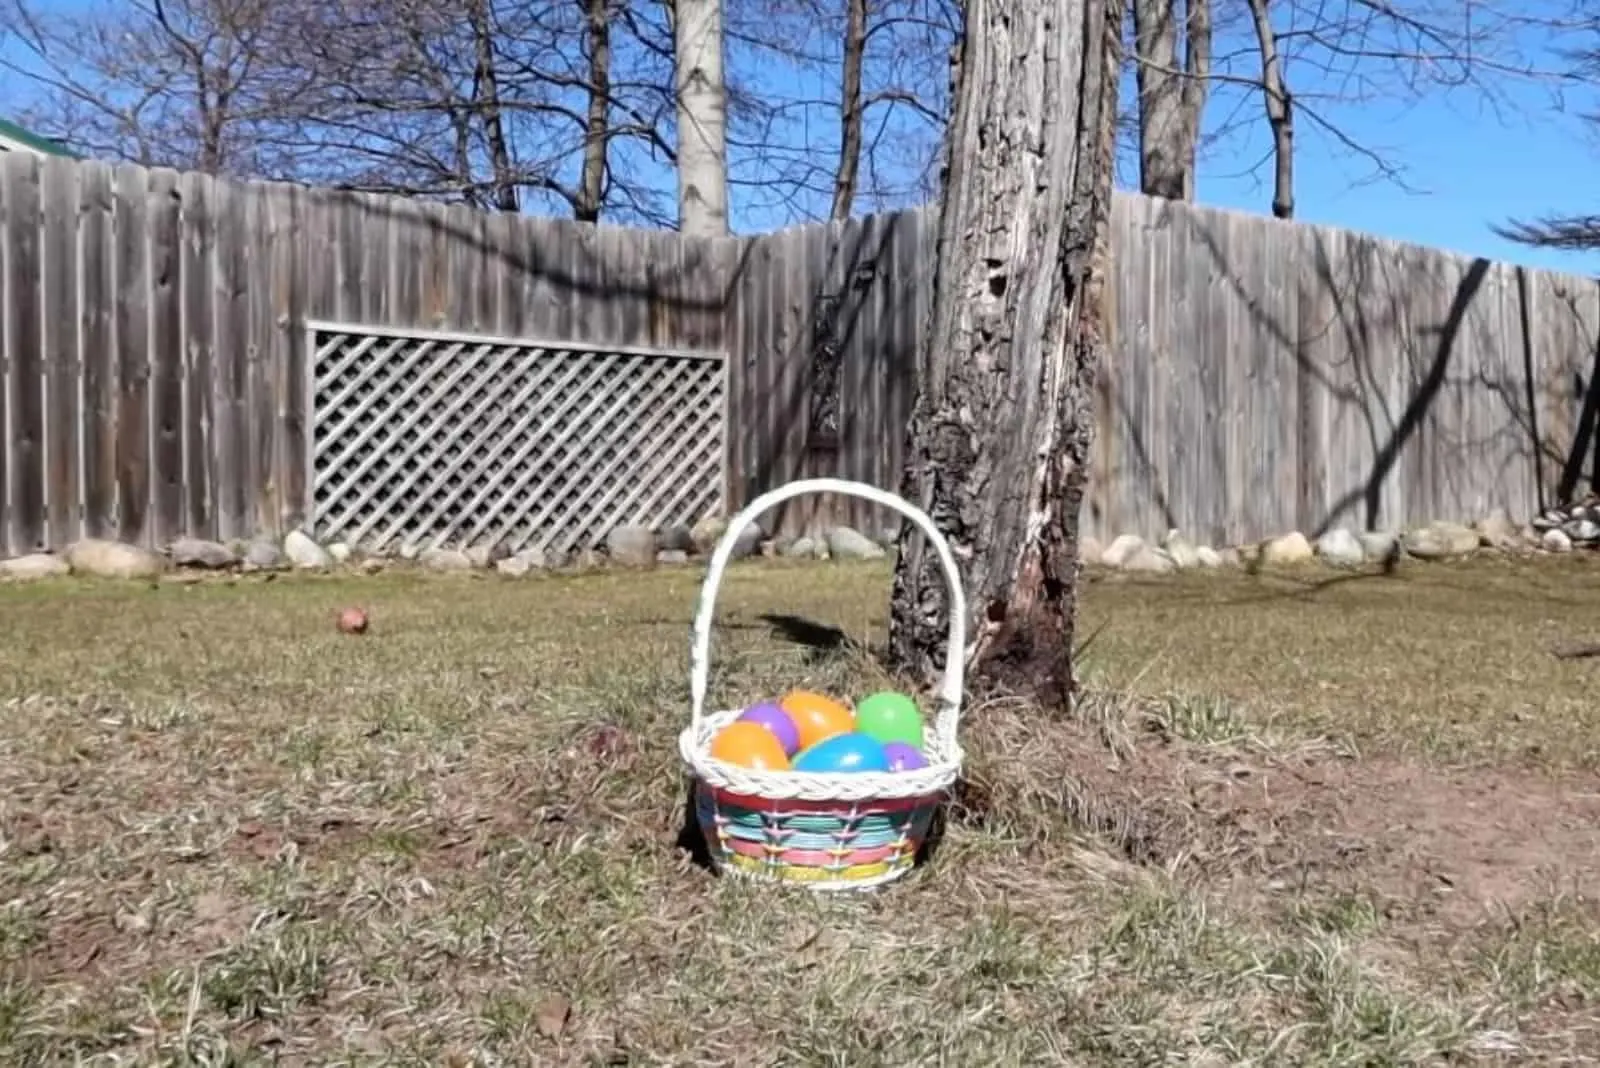 Easter eggs in a basket in the garden